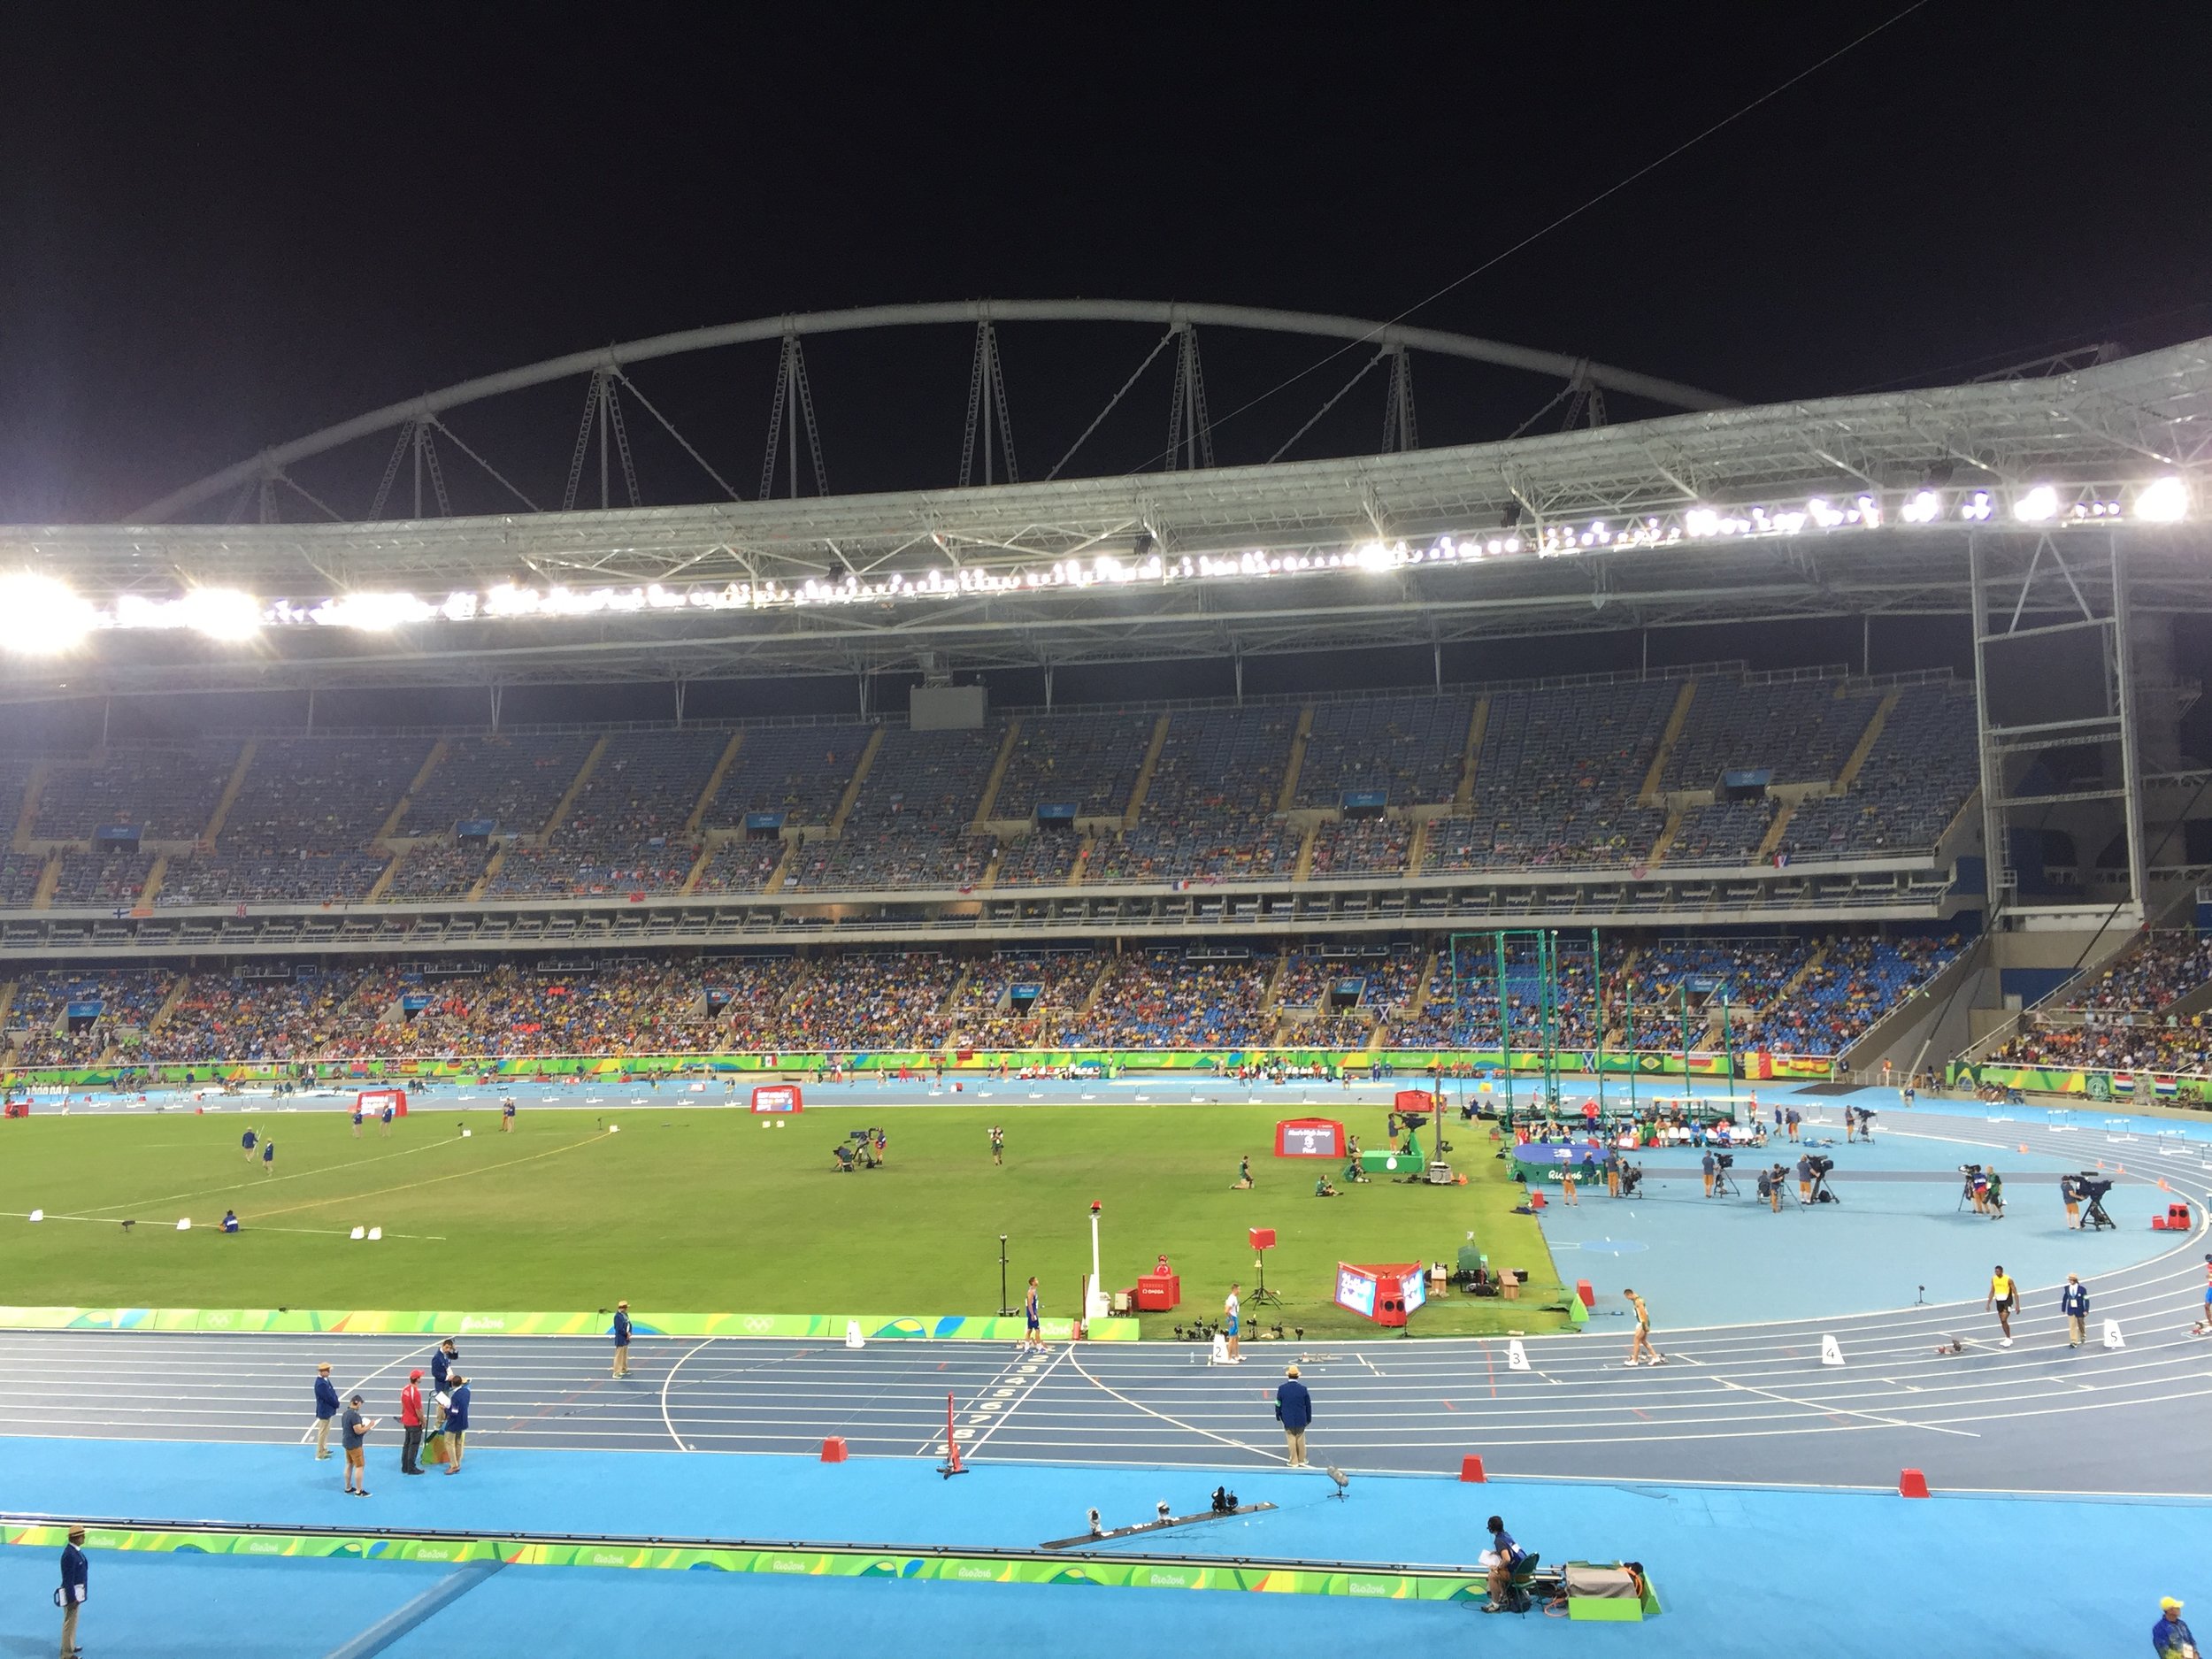 The 'crowd' in the stadium with just the women's 200 semifinals, women's 1500 final and men's 110 hurdle final to go